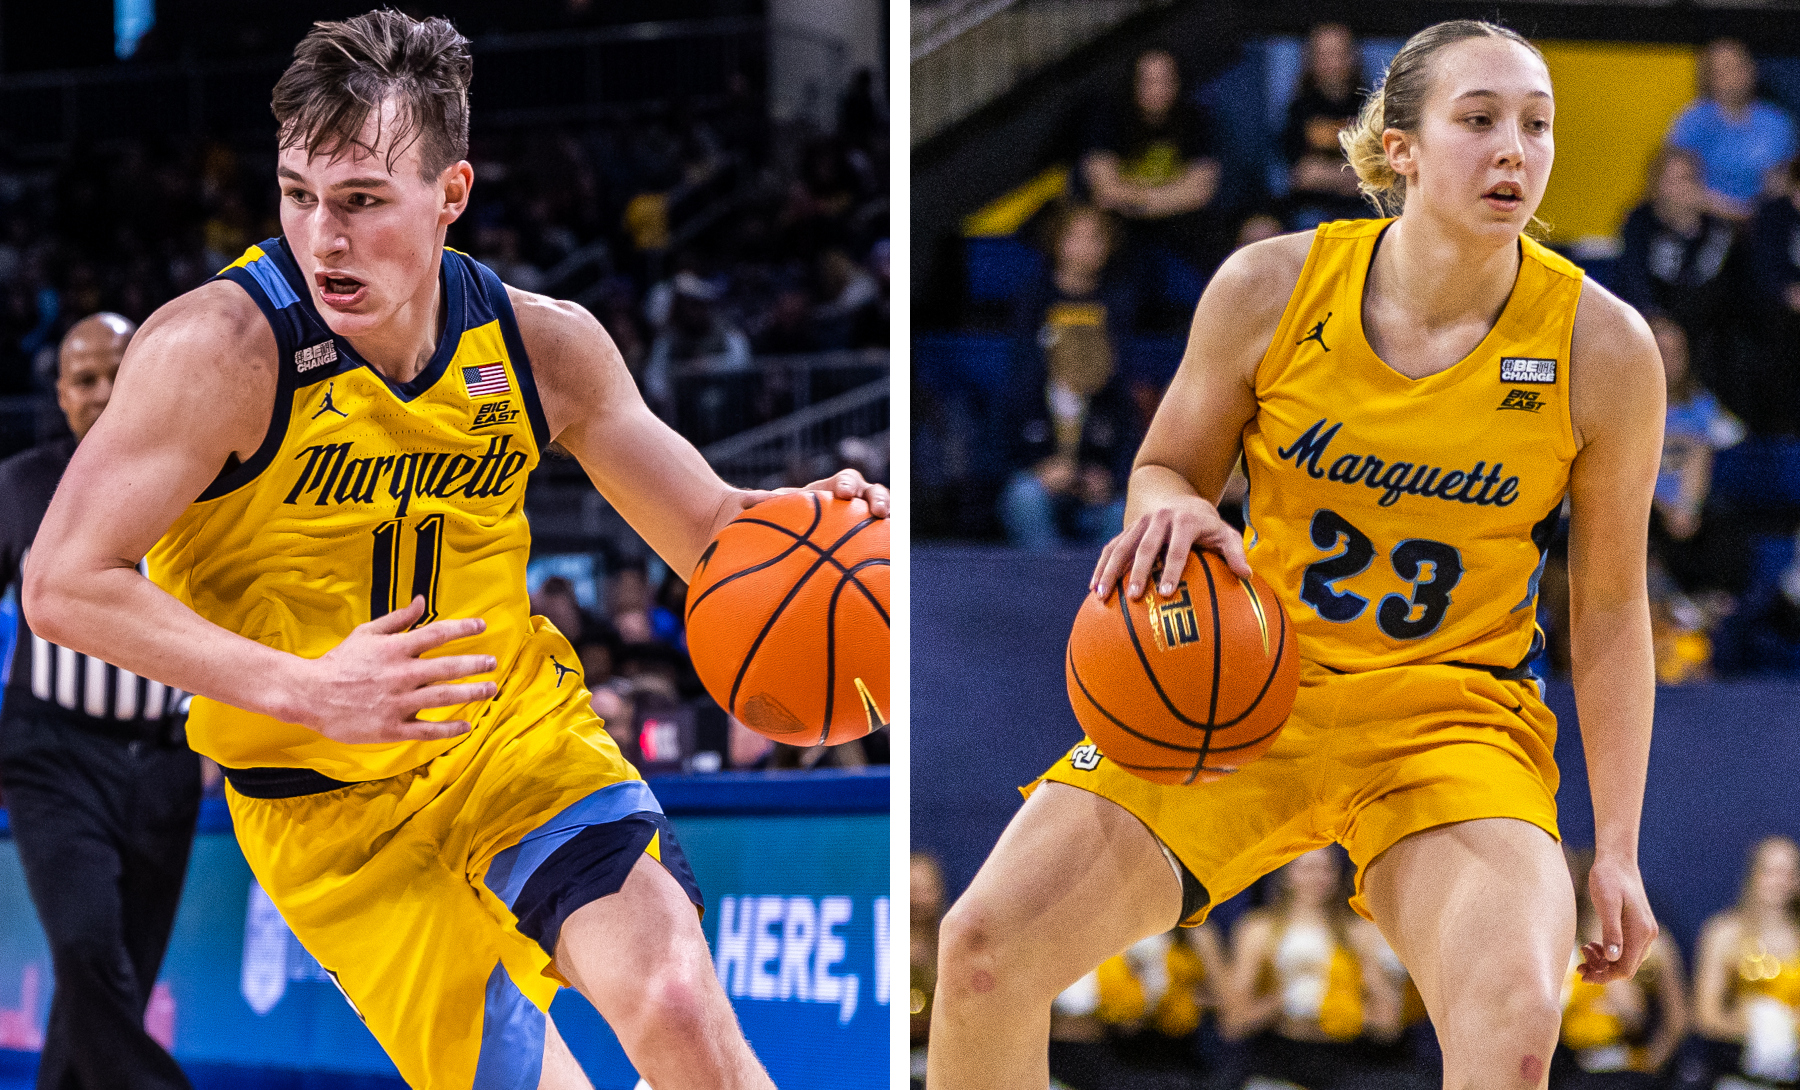 We are Marquette! What to know as men’s and women’s basketball start